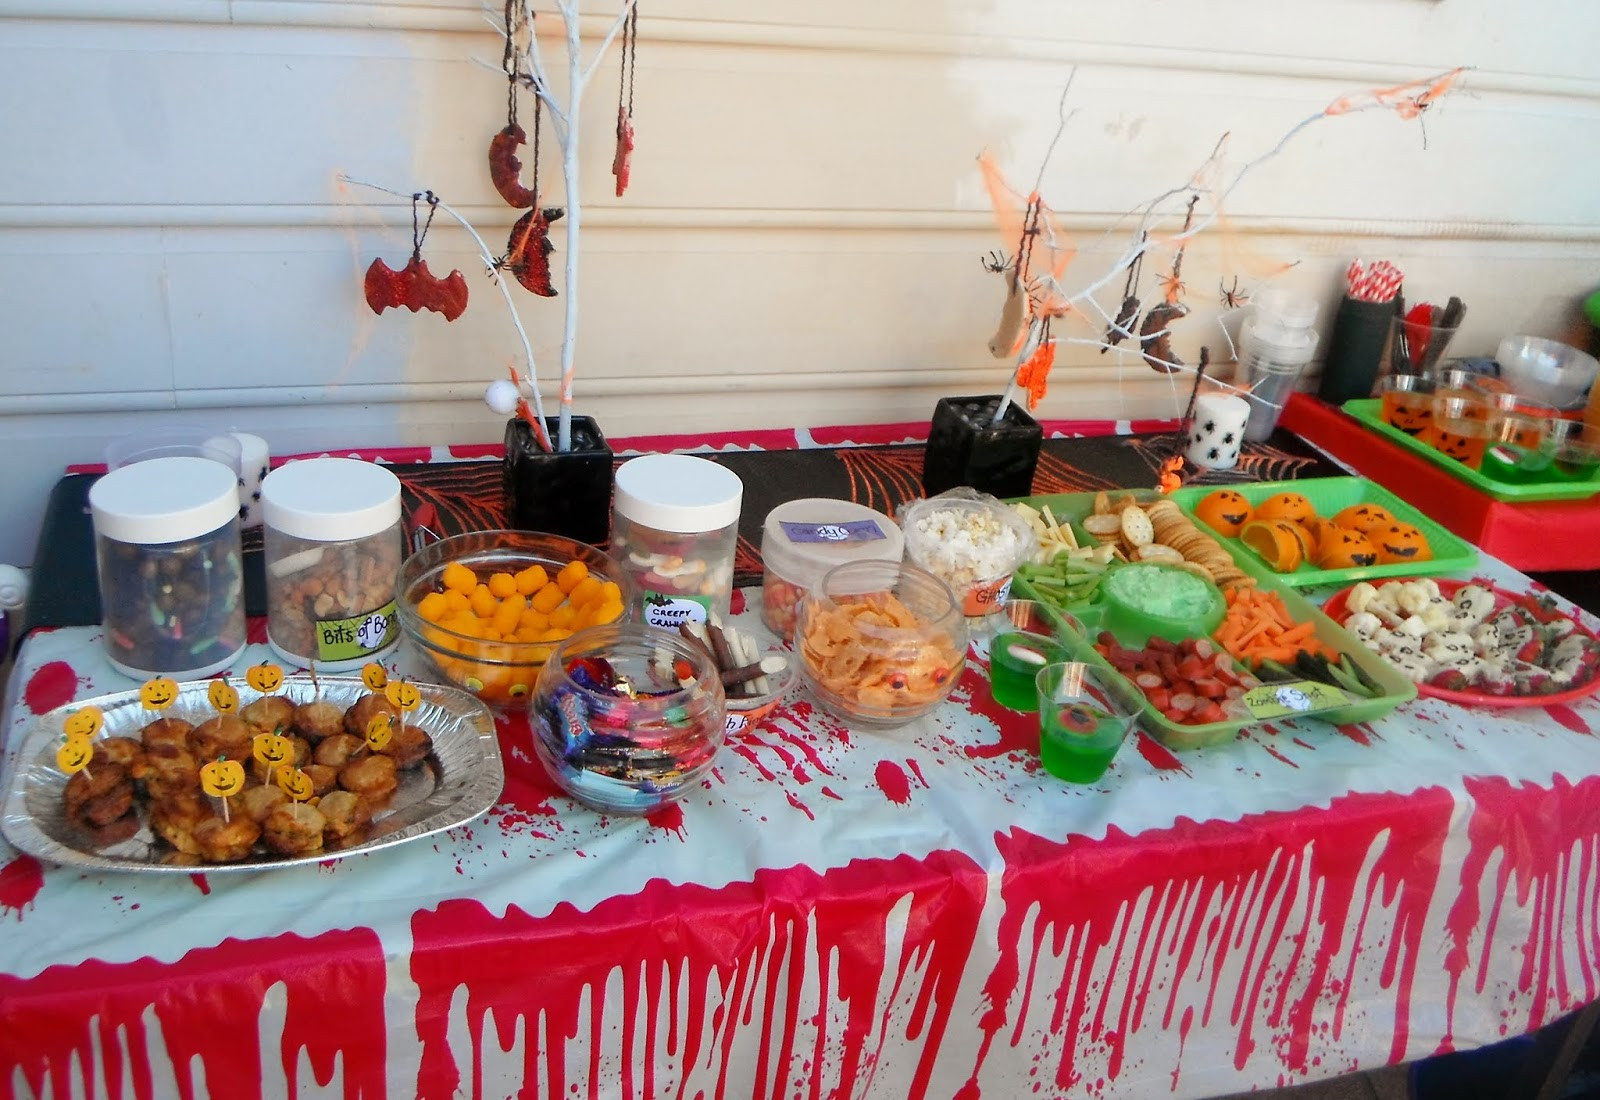 Food For Kids Birthday Party At Home
 Adventures at home with Mum Halloween Party Food